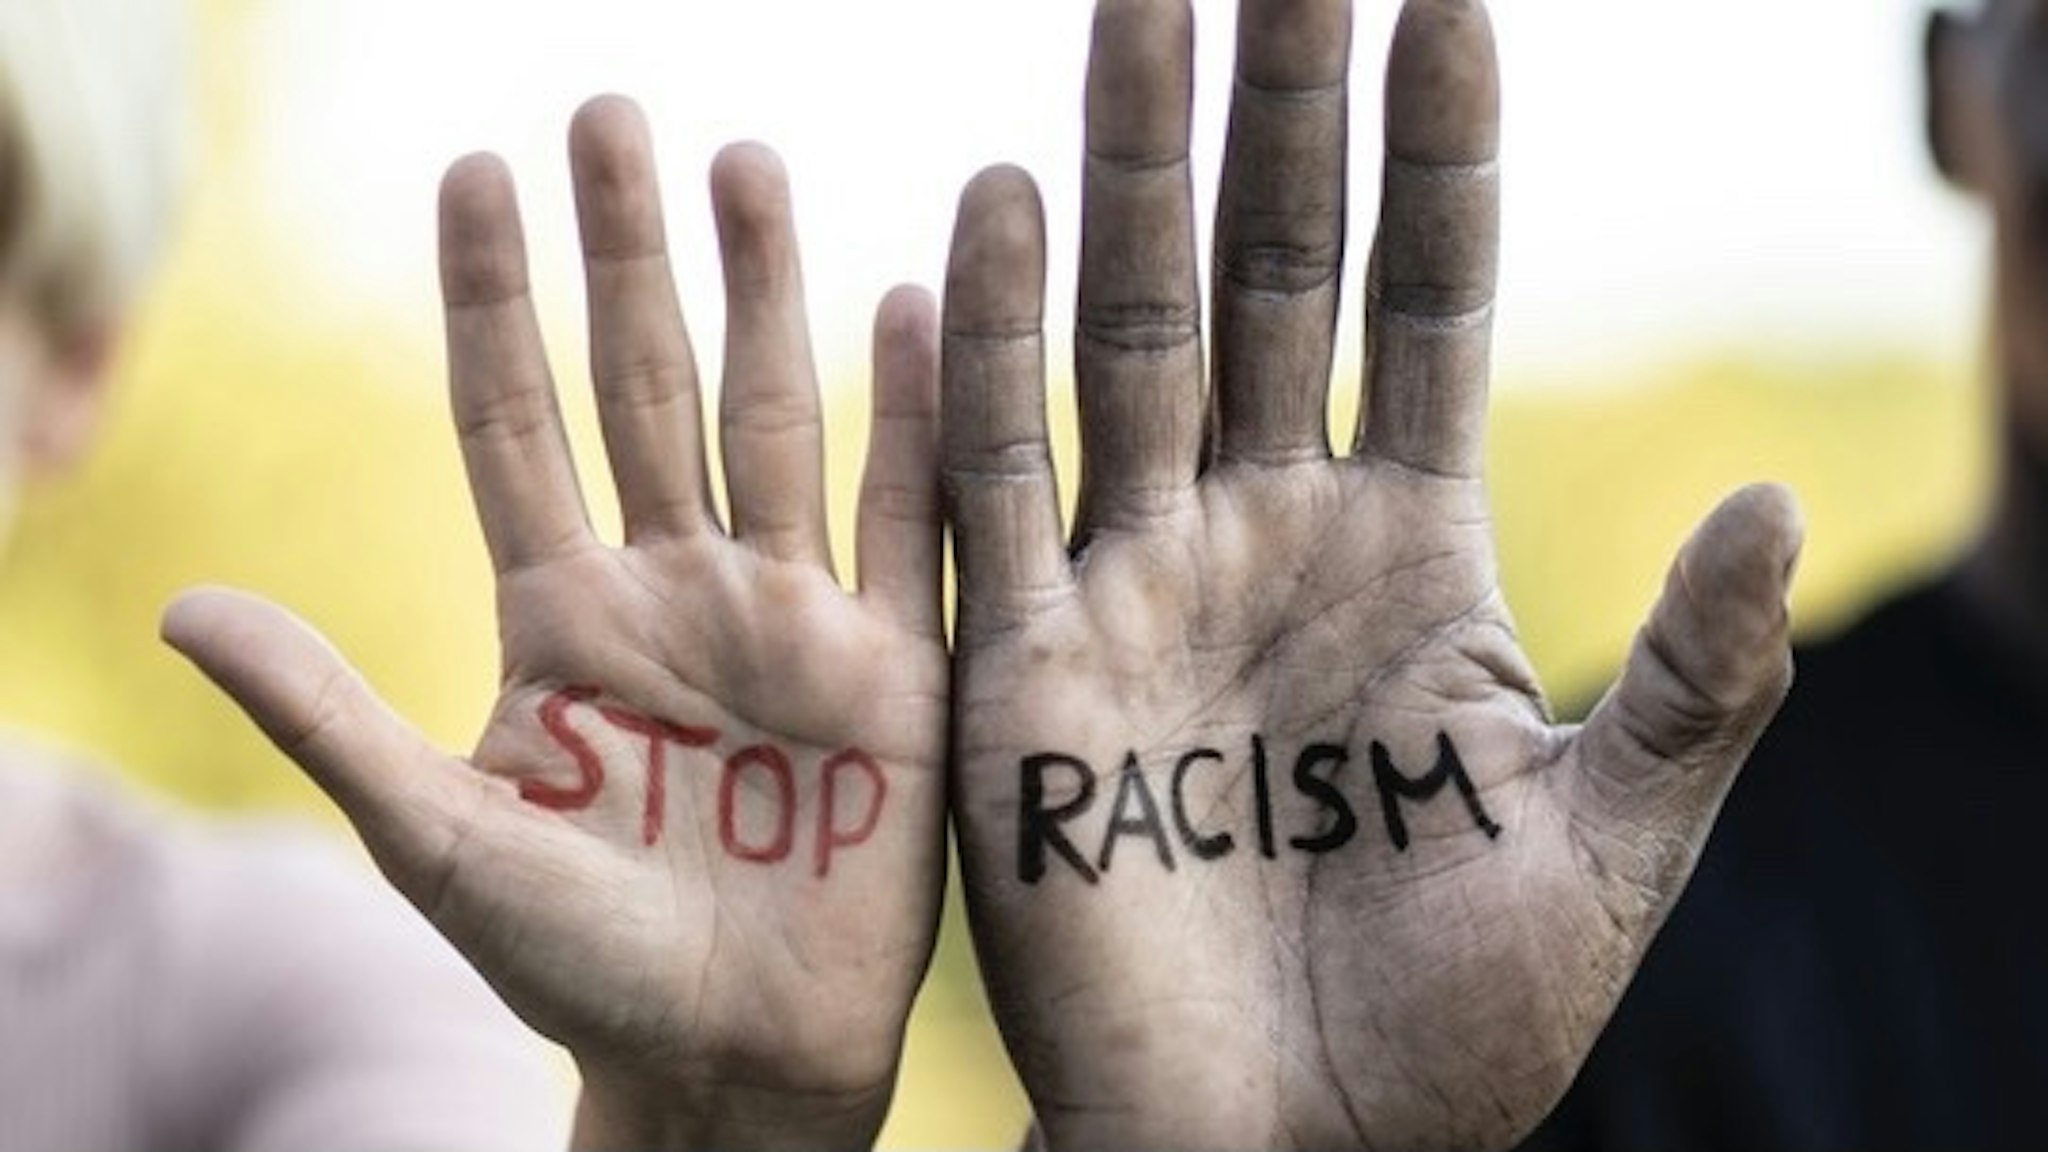 "Stop racism" concept, written on the hands of two multiethnic friends - stock photo Multiethnic friends holding their hands with written slogan "Stop racism" Vladimir Vladimirov via Getty Images